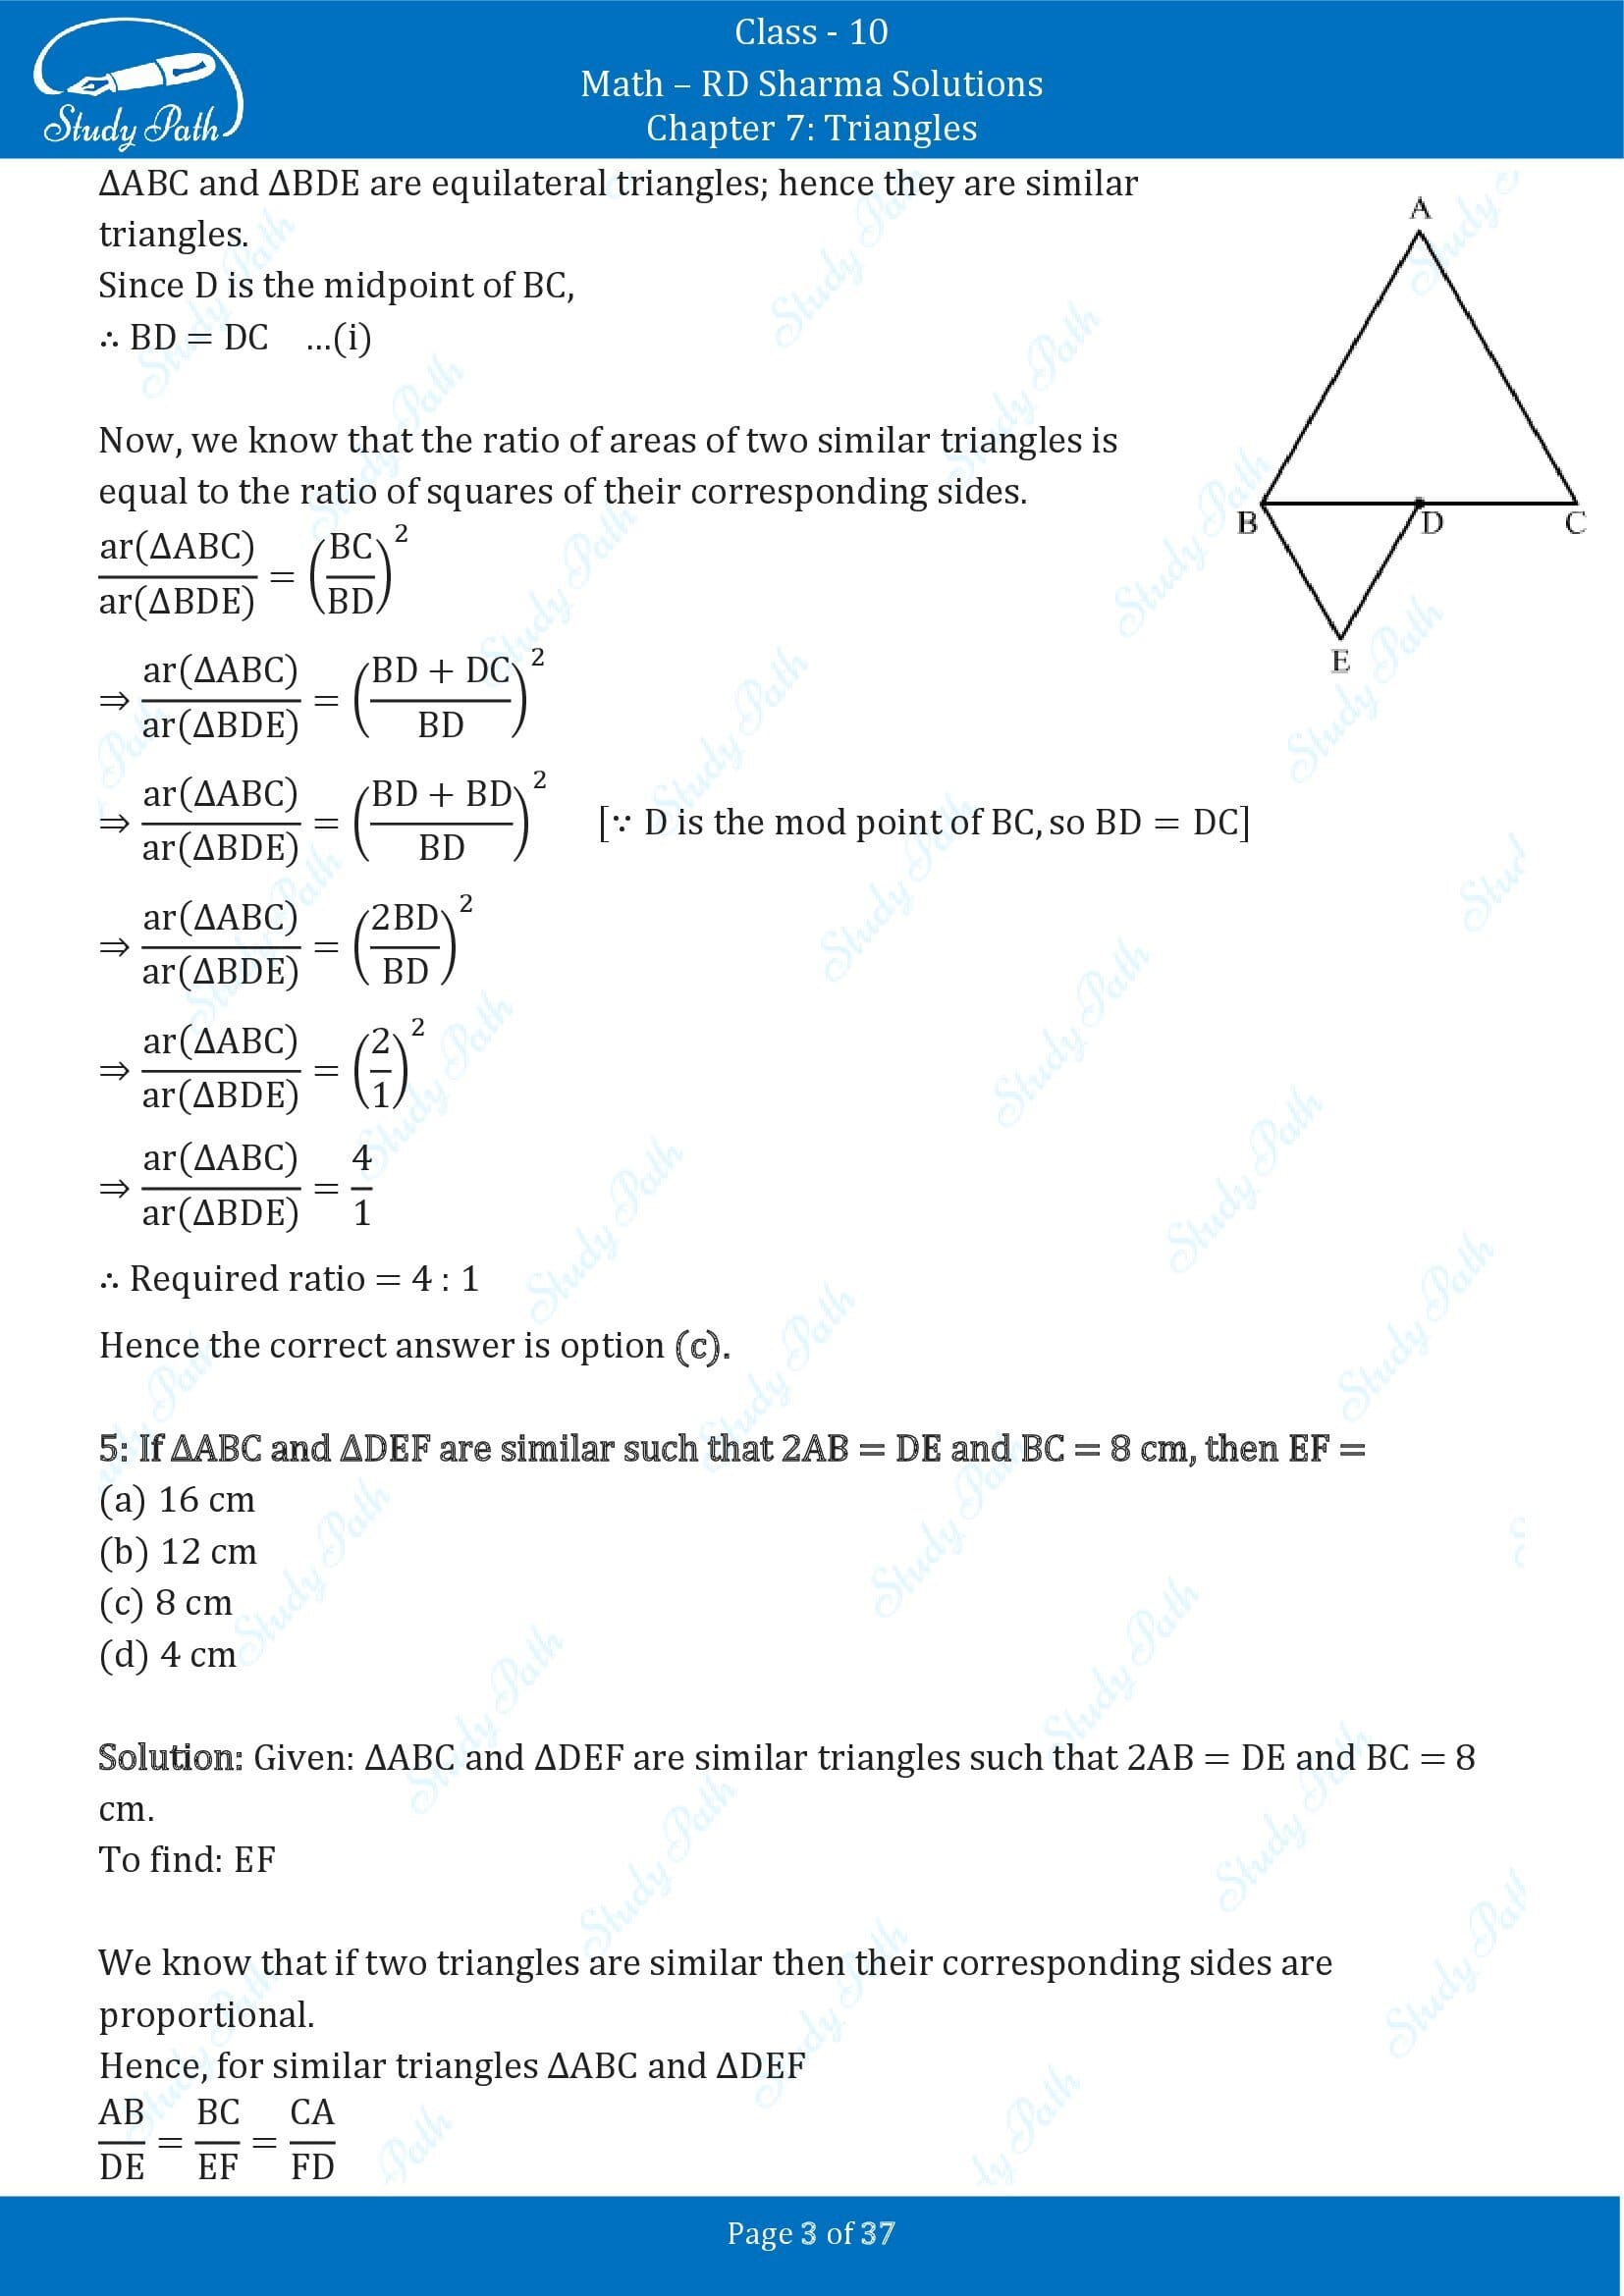 RD Sharma Solutions Class 10 Chapter 7 Triangles Multiple Choice Question MCQs 00003